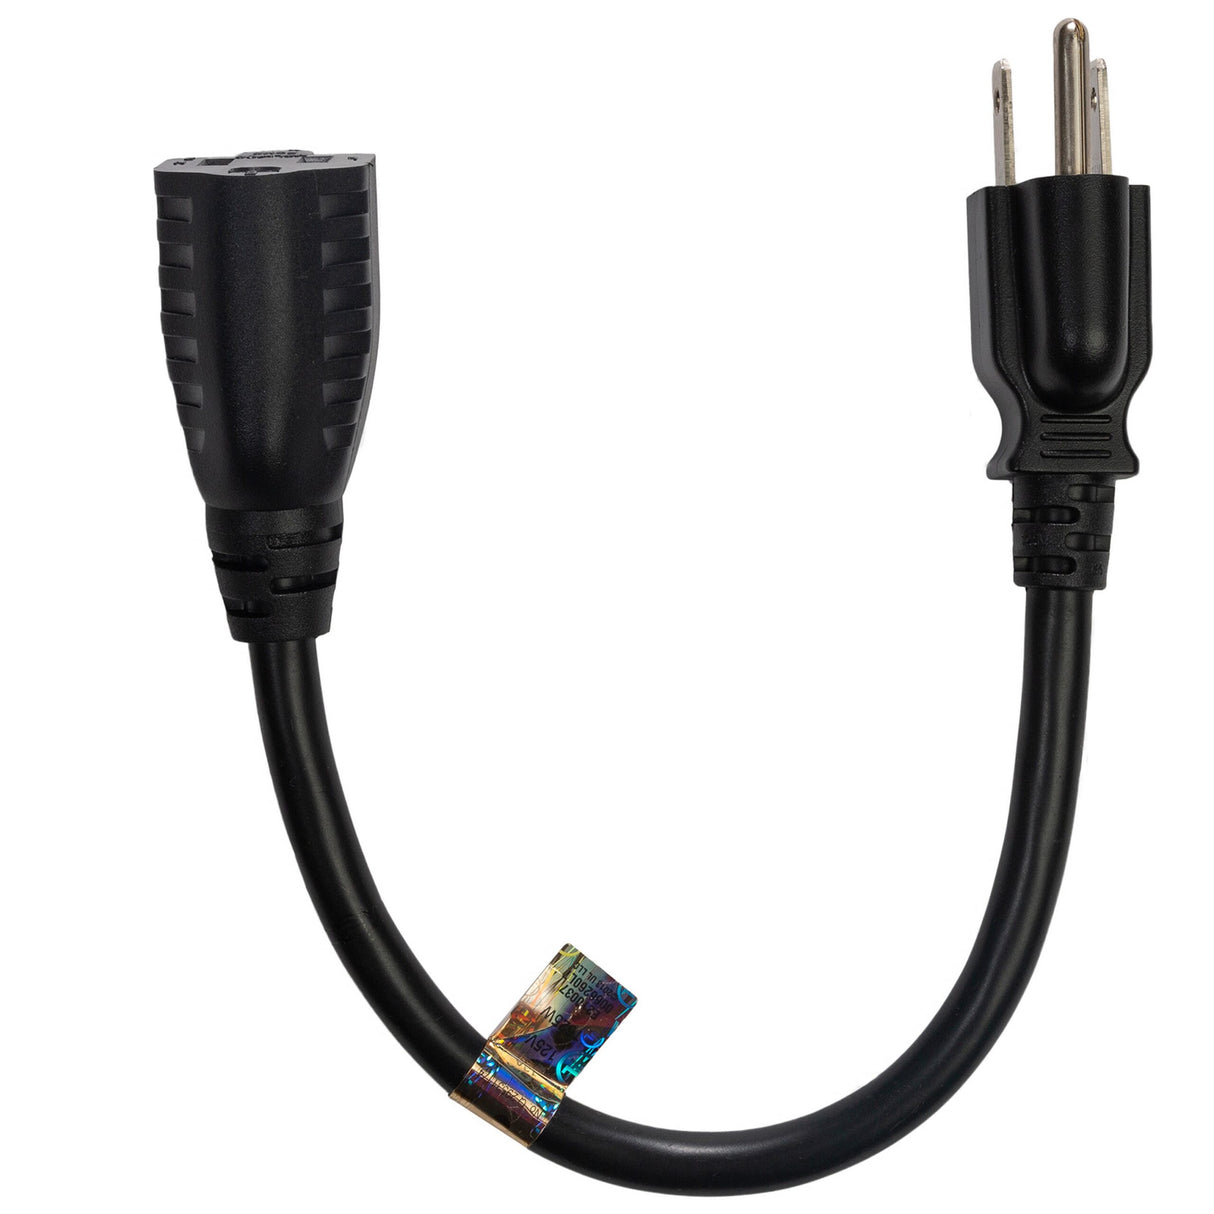 Panamax 15-EXT1 13 Amp 12 Inch Extension Cable